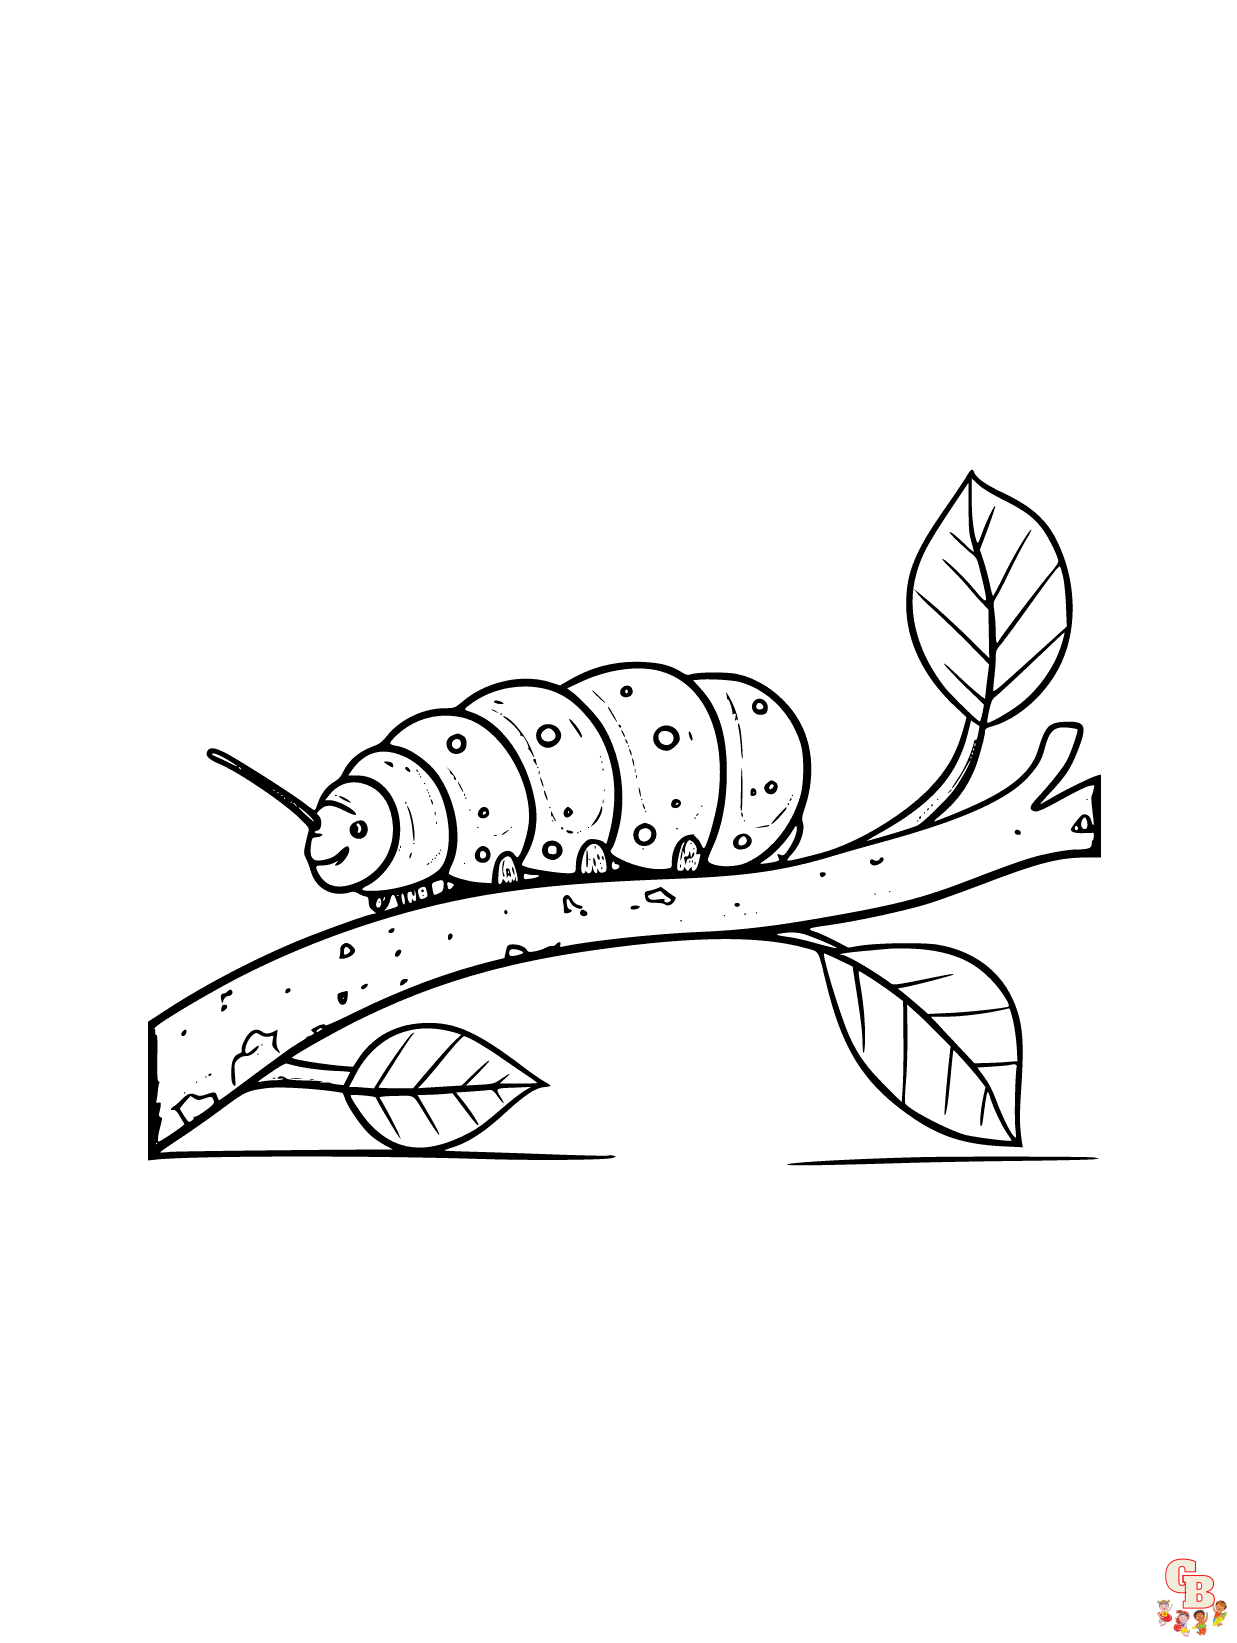 Caterpillar coloring pages printable free